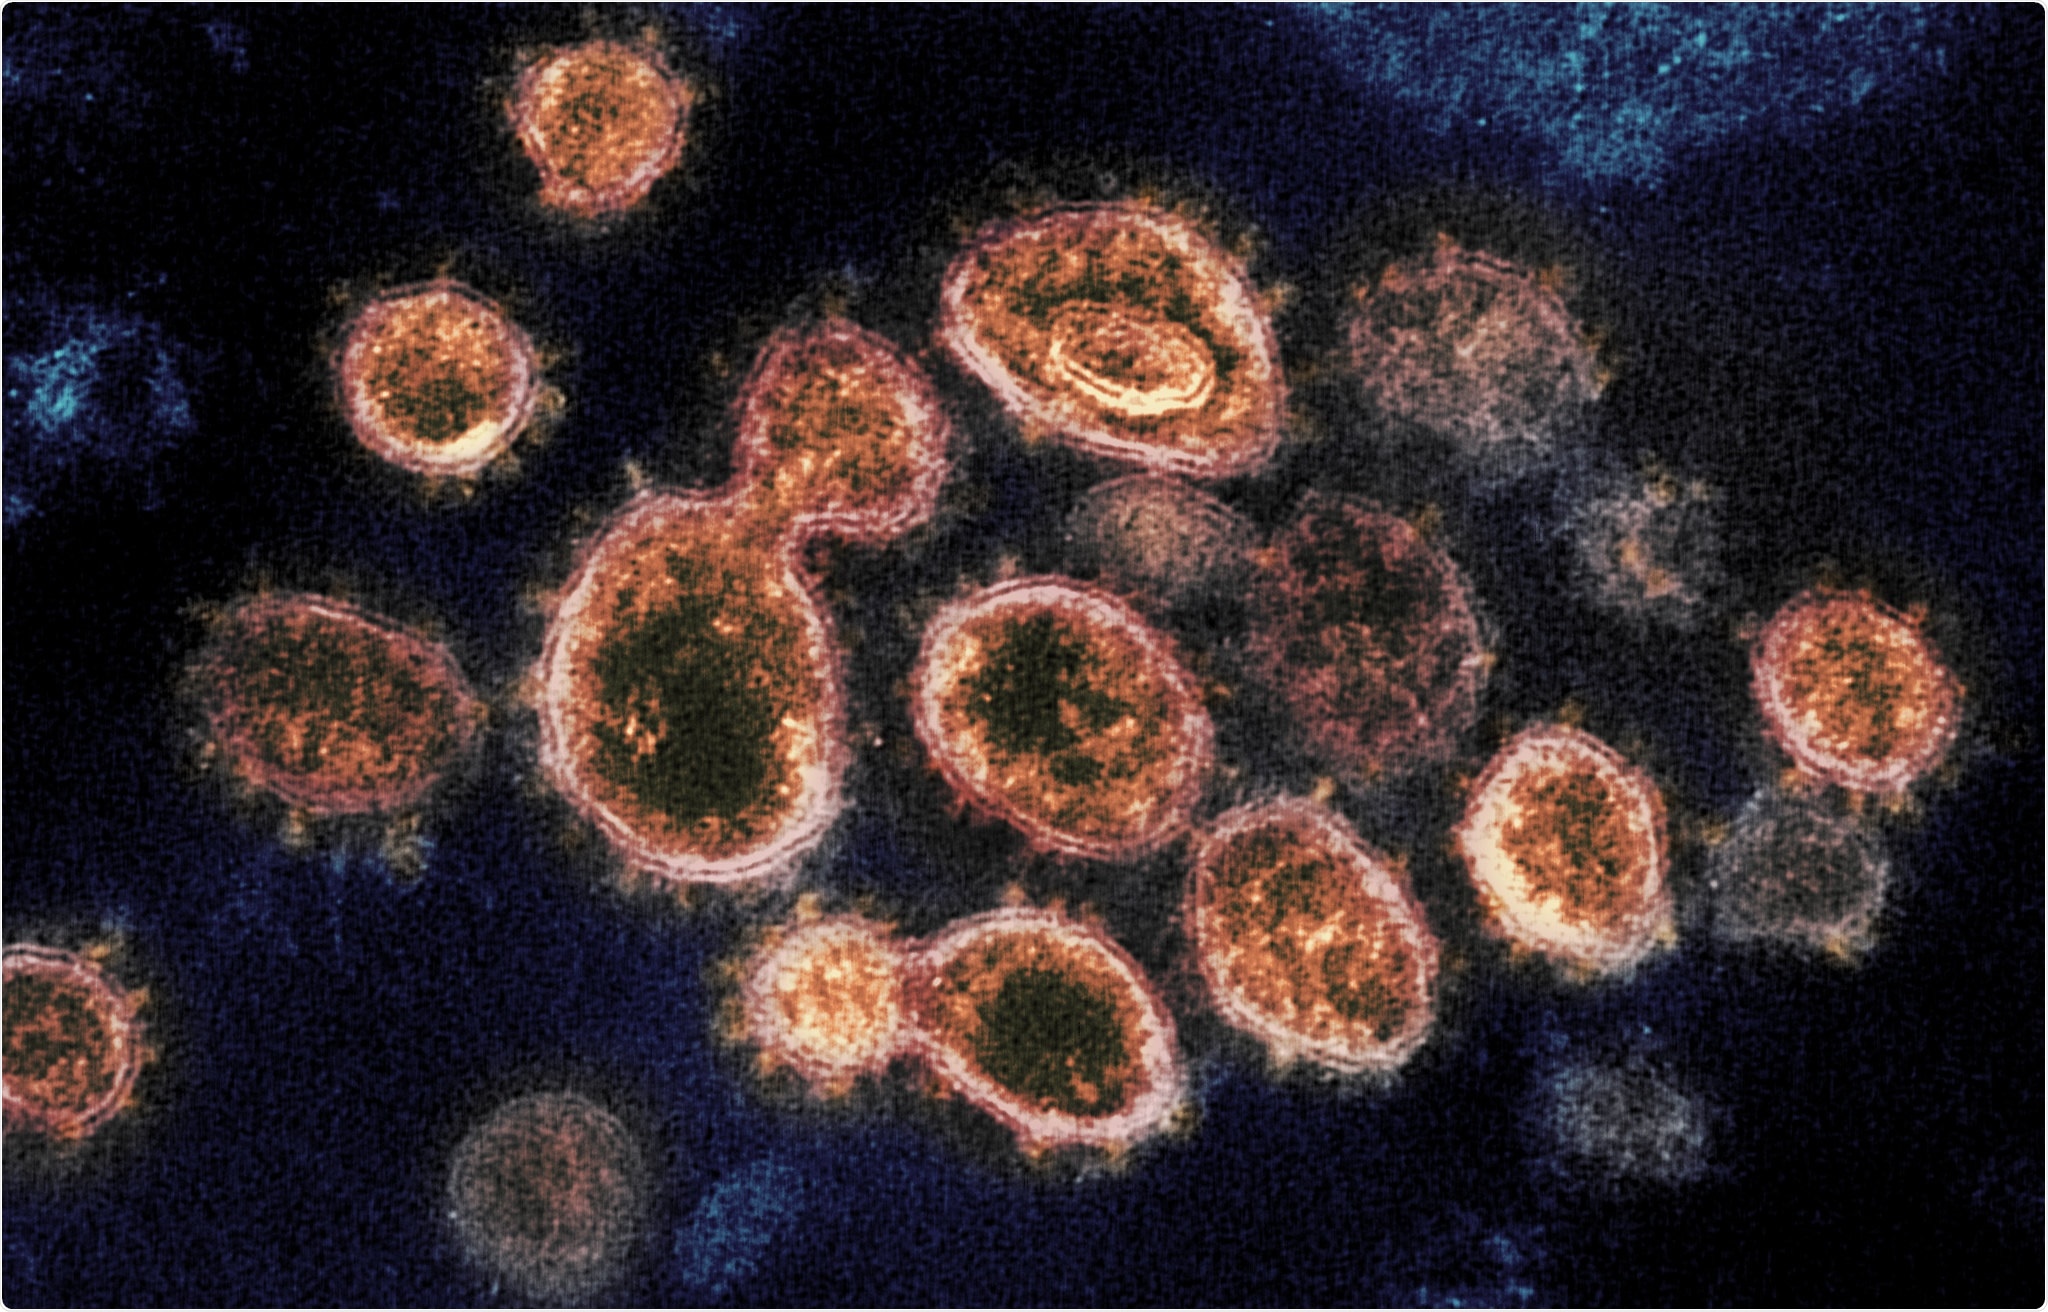 European scientists have detected a new strain of SARS-CoV-2, the virus that causes Covid-19, which has been rapidly spreading across Europe since June and is now the cause of most of the cases observed in the second wave of infections in some countries on the continent.